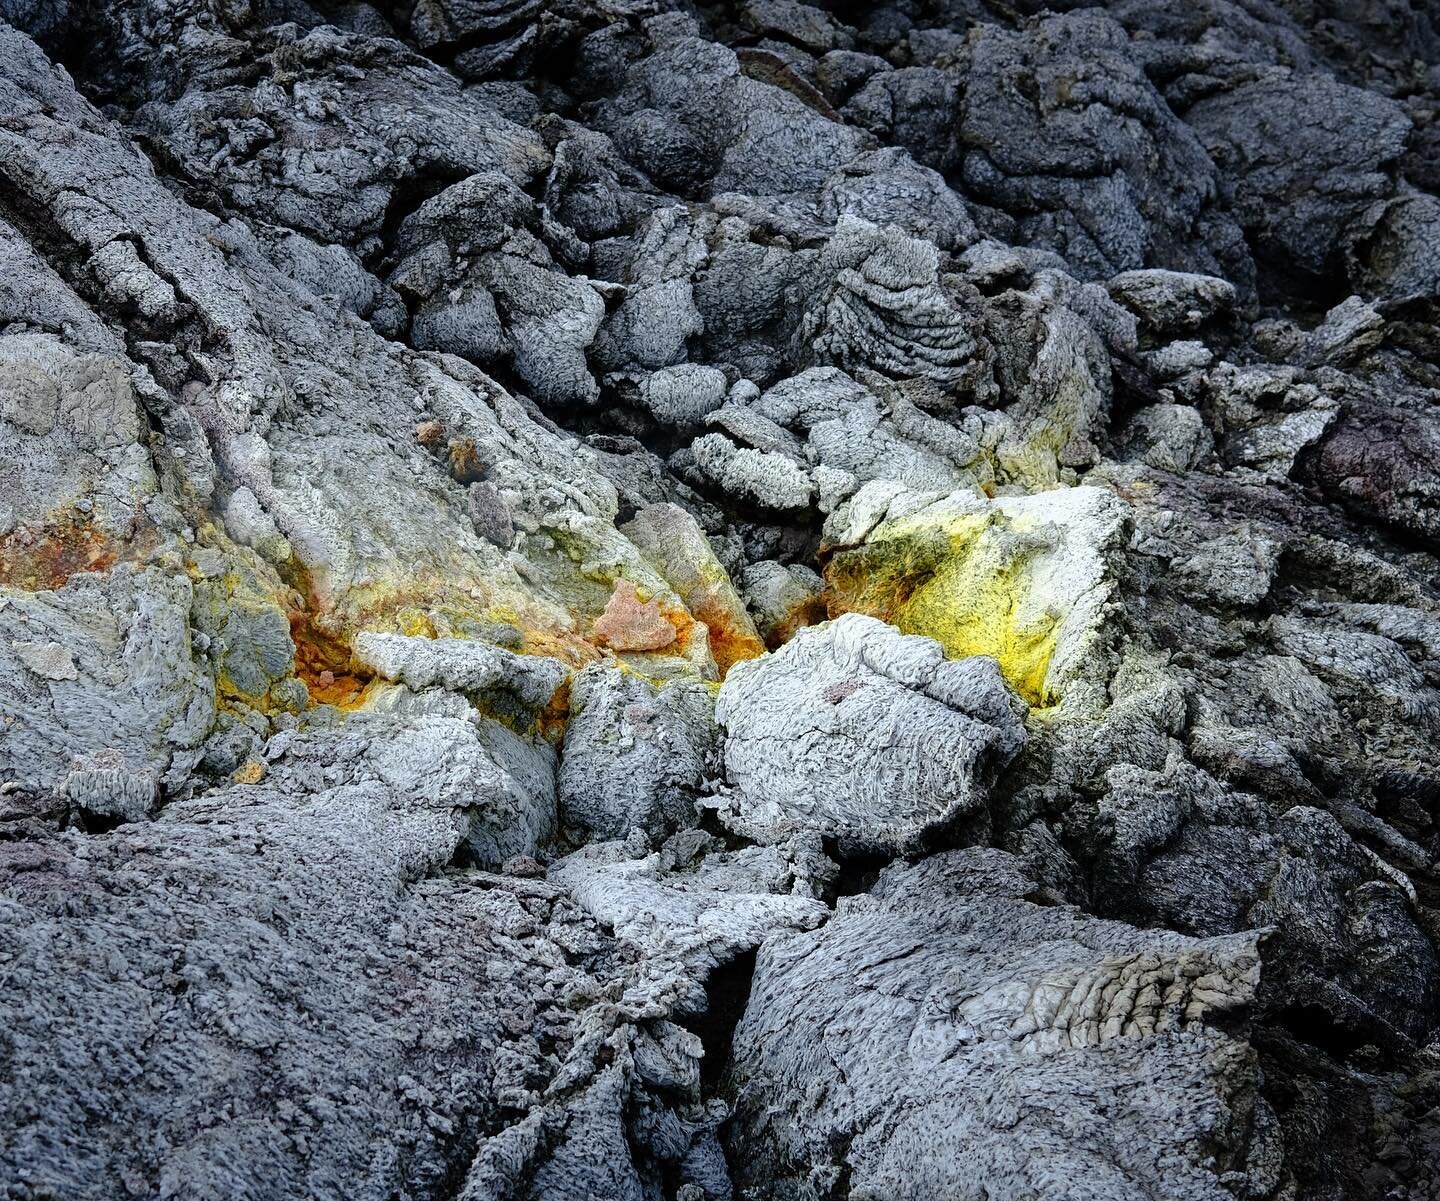 the textures and hues from volcanic rock are intoxicating, or maybe it was just the carbon &amp; sulphur dioxide leaking out of the steam vents 😶&zwj;🌫️ either way, to stand on such young earth is something surreal. #x100v #5dmarkiv #fagradalsfjall